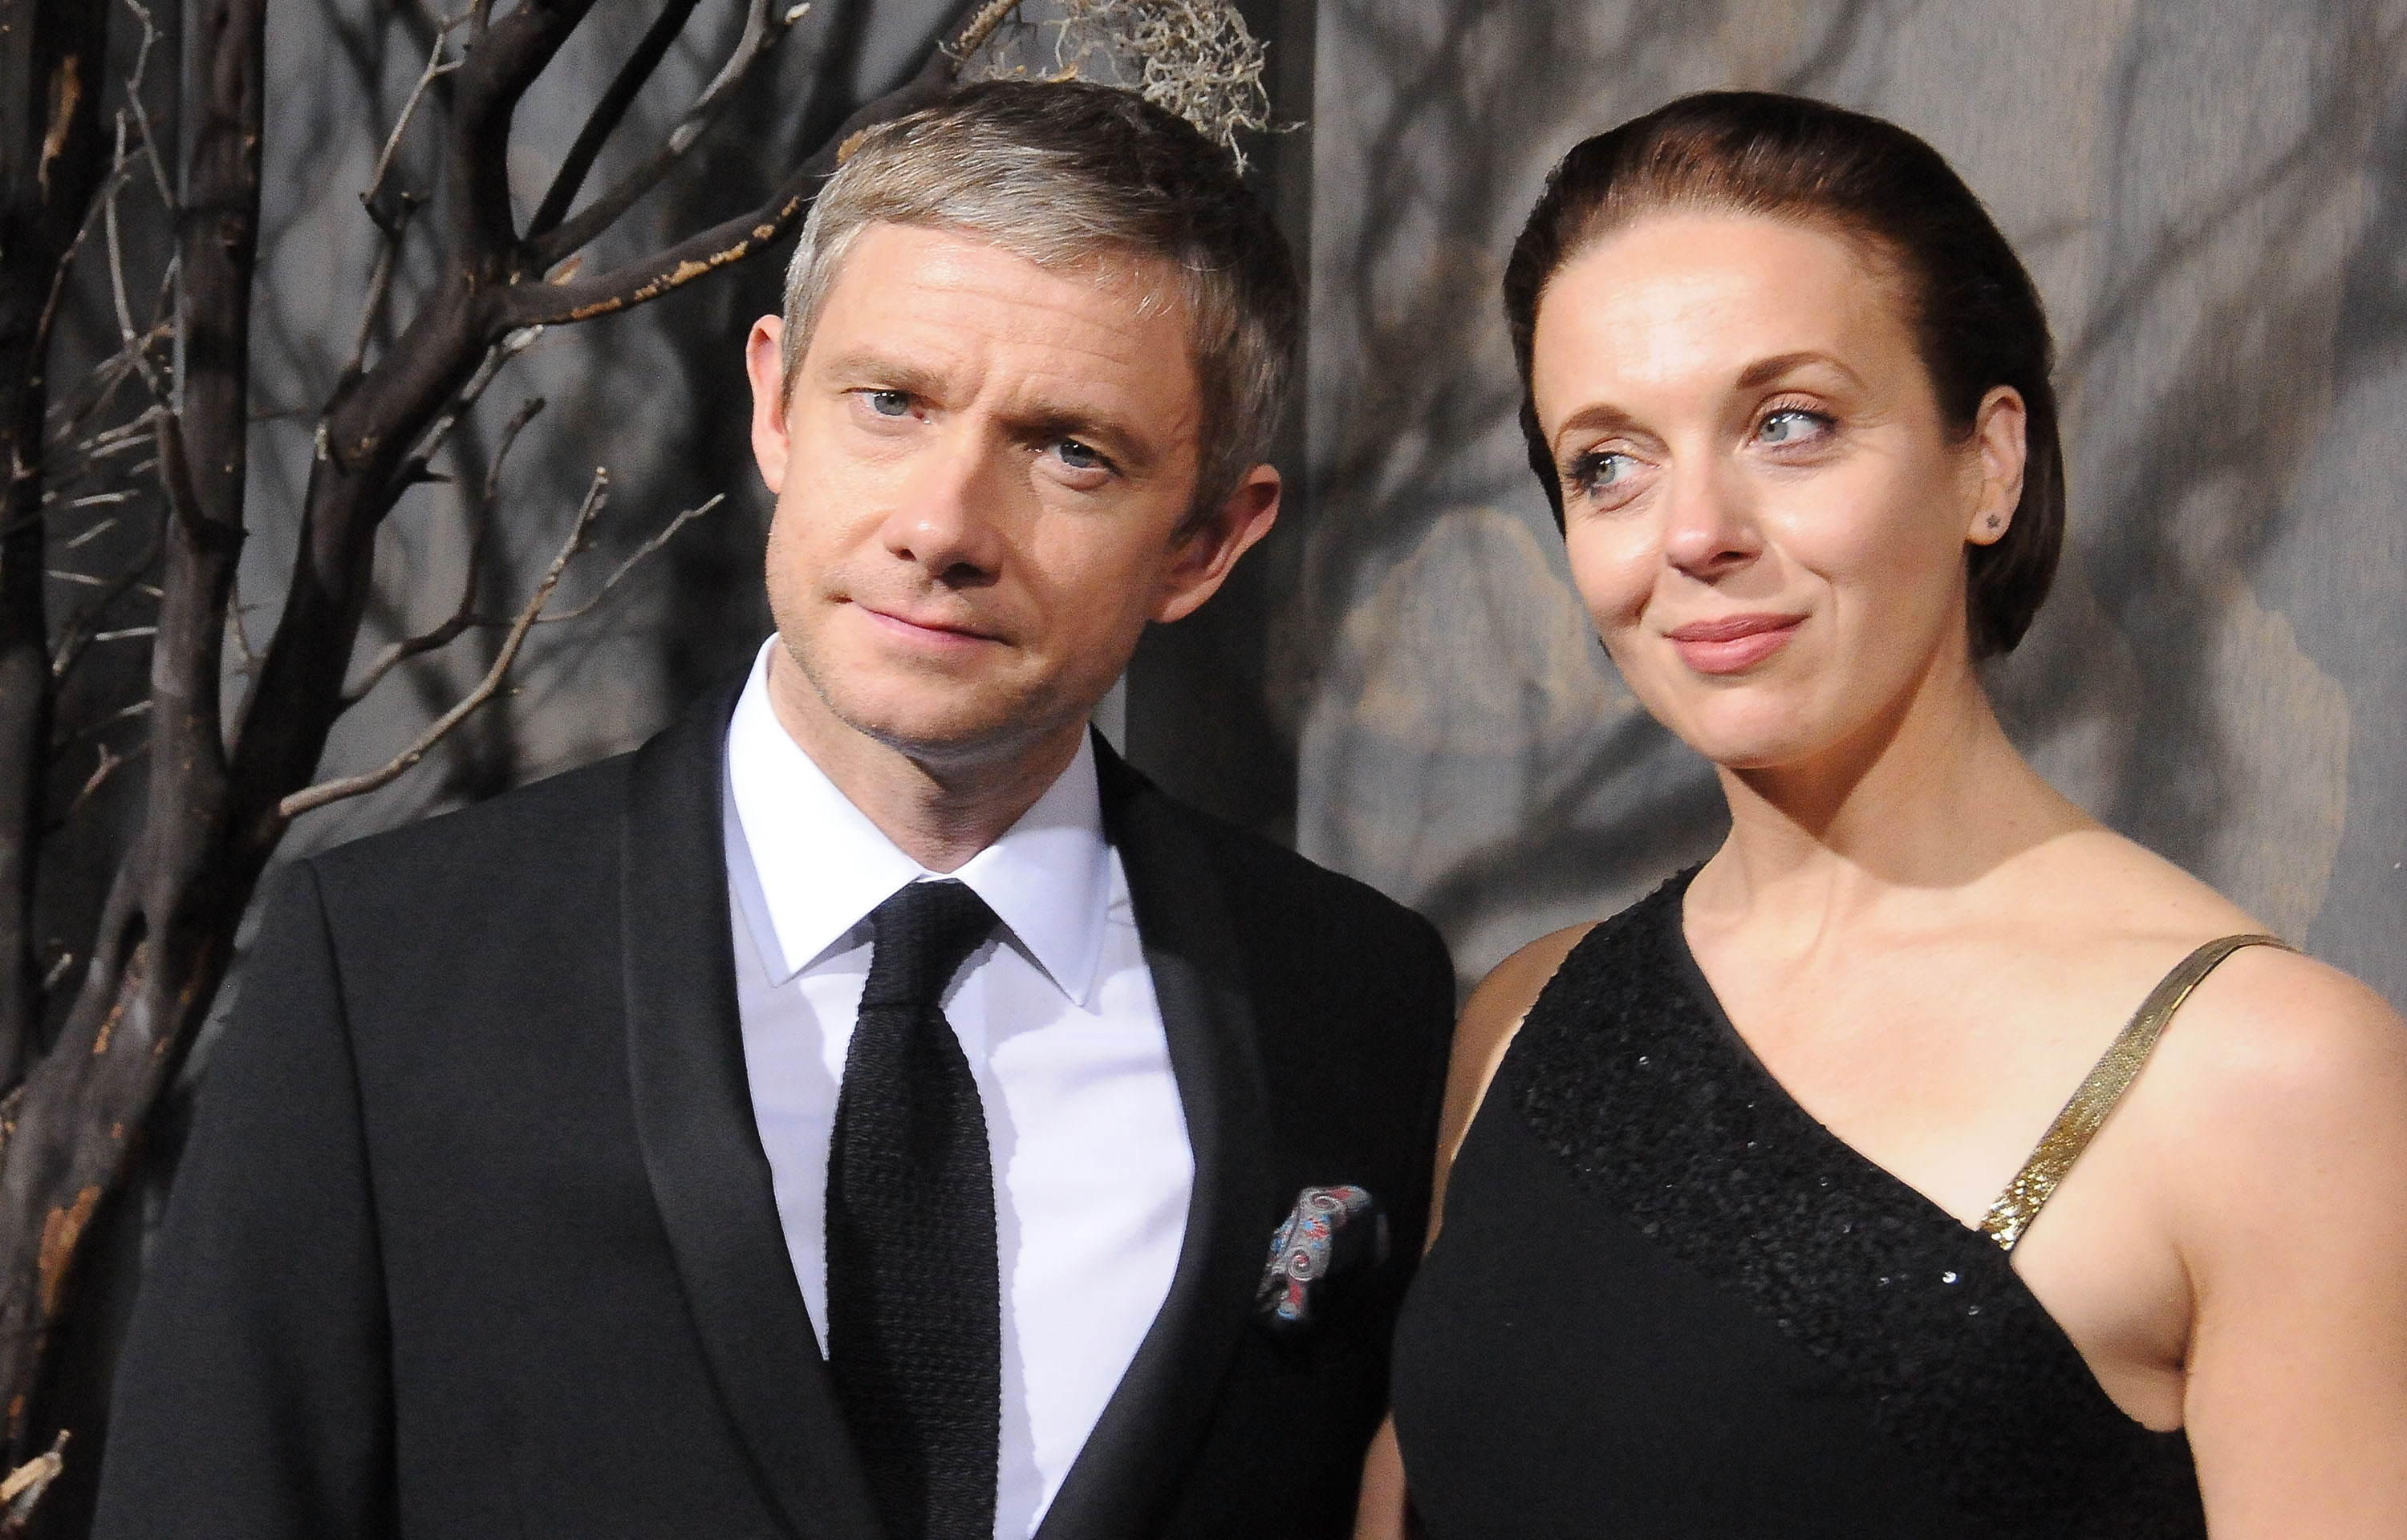 Martin Freeman and Amanda Abbington pose at the premiere of 'The Hobbit: The Desolation Of Smaug' at TCL Chinese Theatre on December 2, 2013, in Hollywood, California | Source: Getty Images